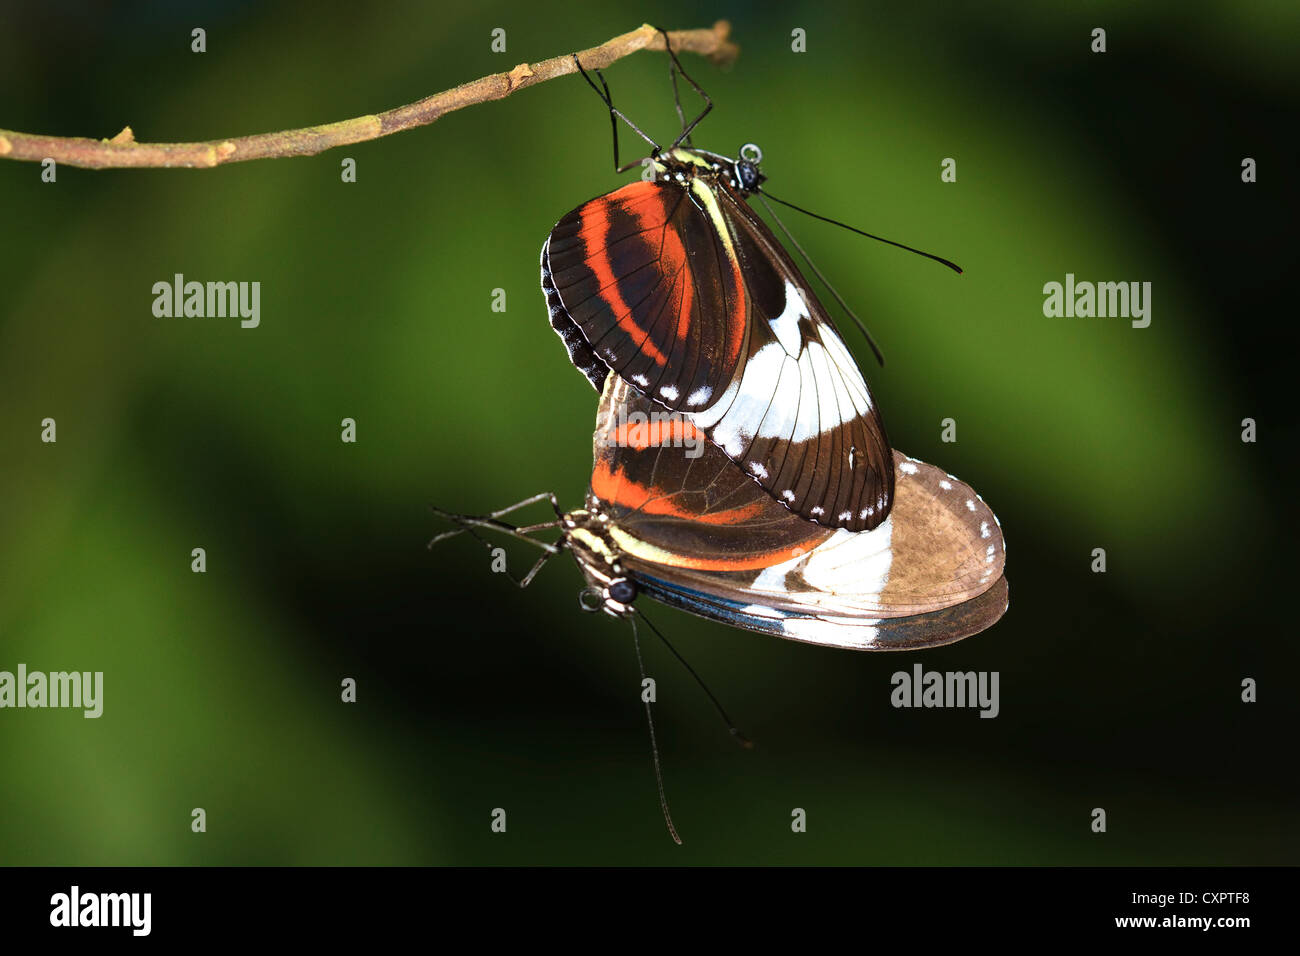 Cydno Longwing Butterfly Banque D'Images